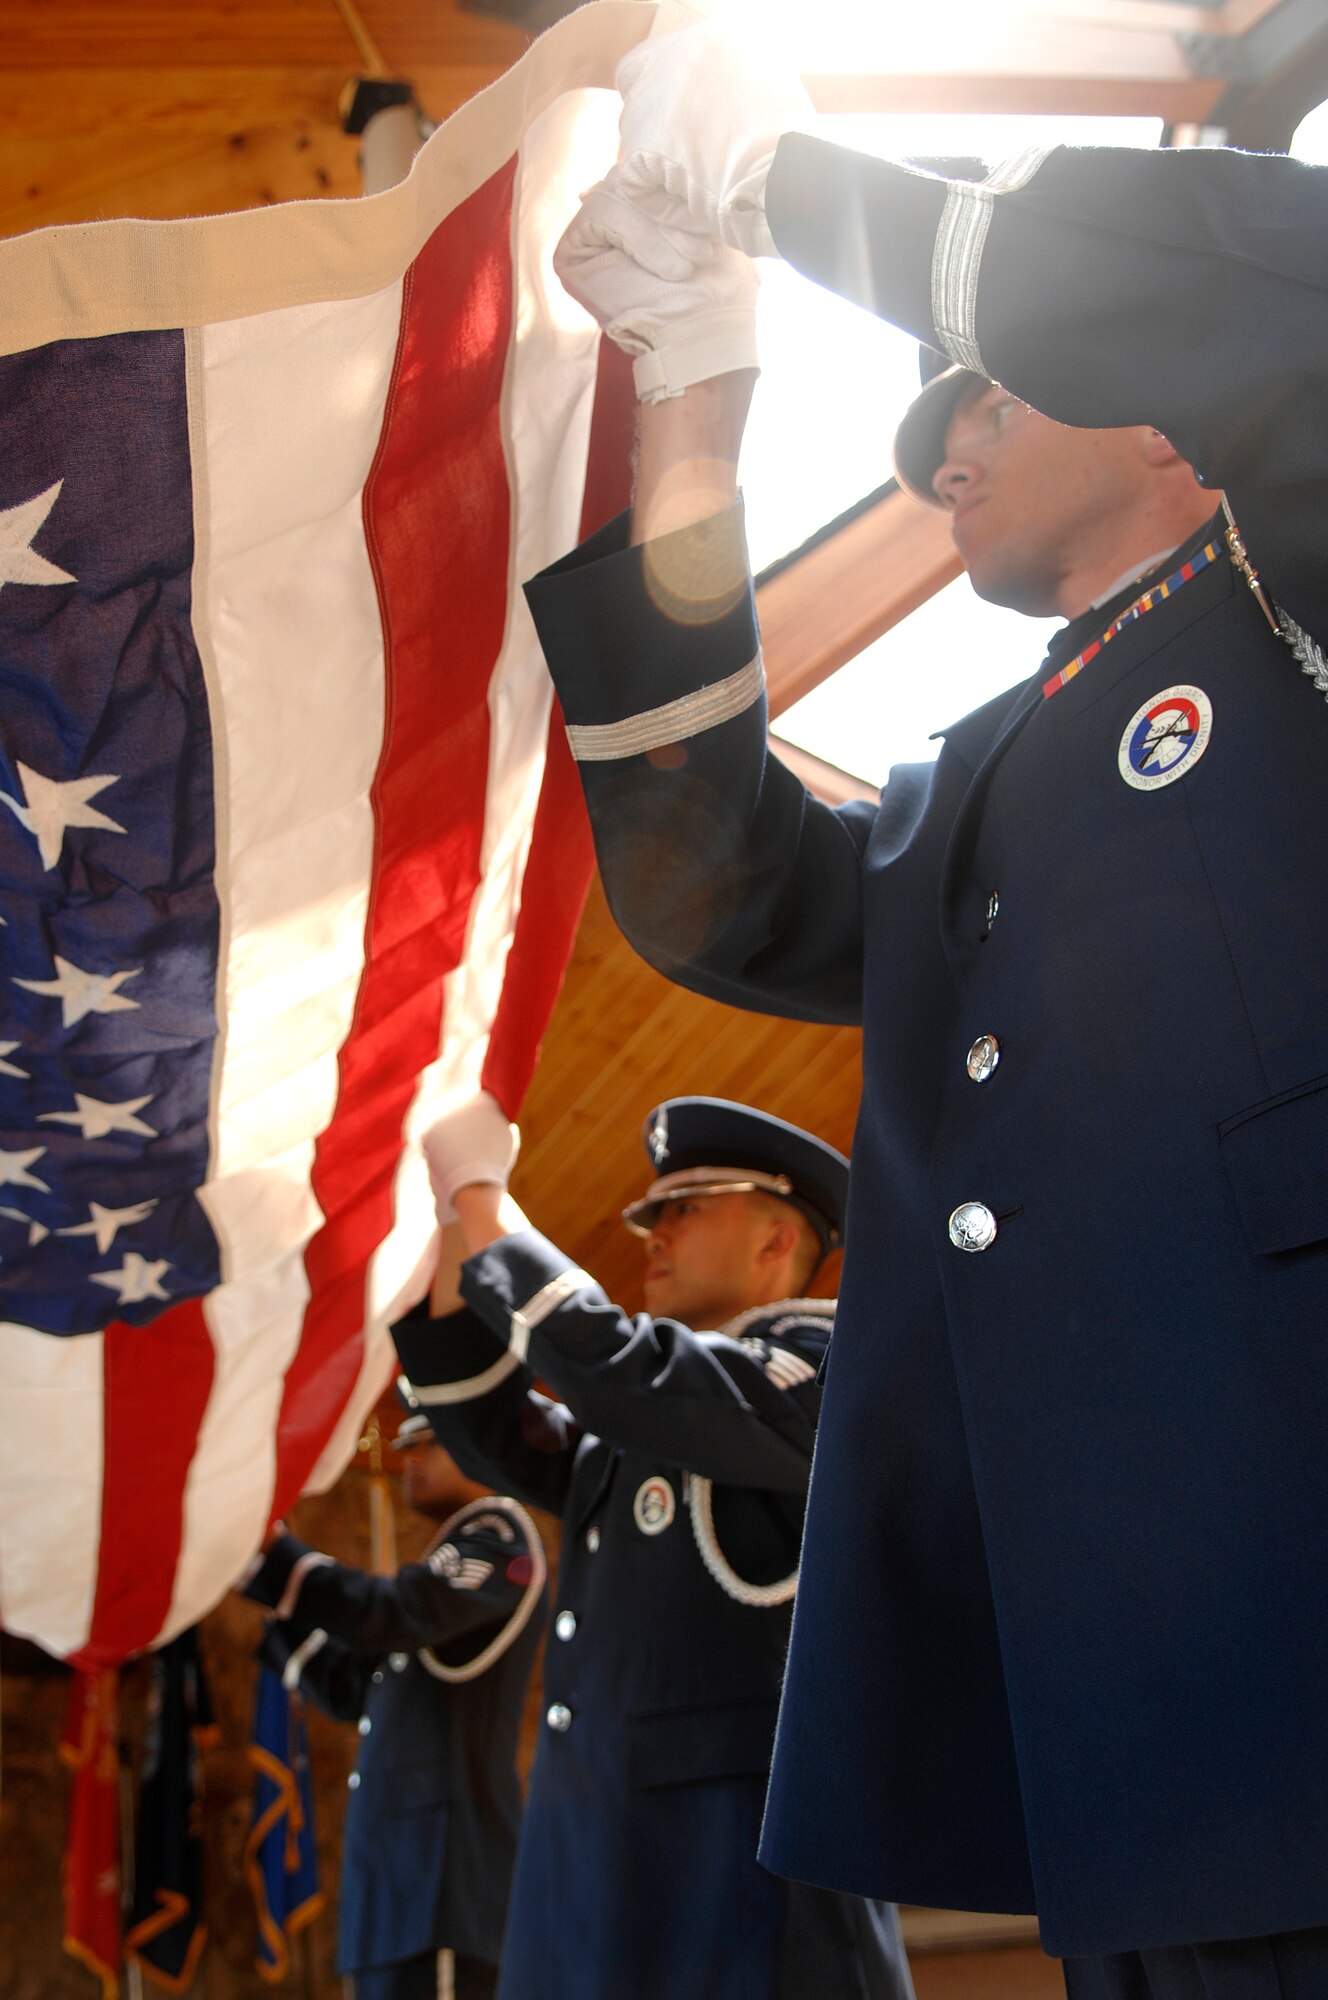 (From right) Airman 1st Class Ray Wahl, Staff Sgt. Daniel Chin and Staff Sgt. Ruben TrejoSanchez, Ellsworth Air Force Base Honor Guard members, fold a flag before a funeral service held at the Black Hills National Cemetery, July 31. The service was held for a retired Air Force master sergeant. (U.S. Air Force photo/Senior Airman Marc I. Lane)(Released)
